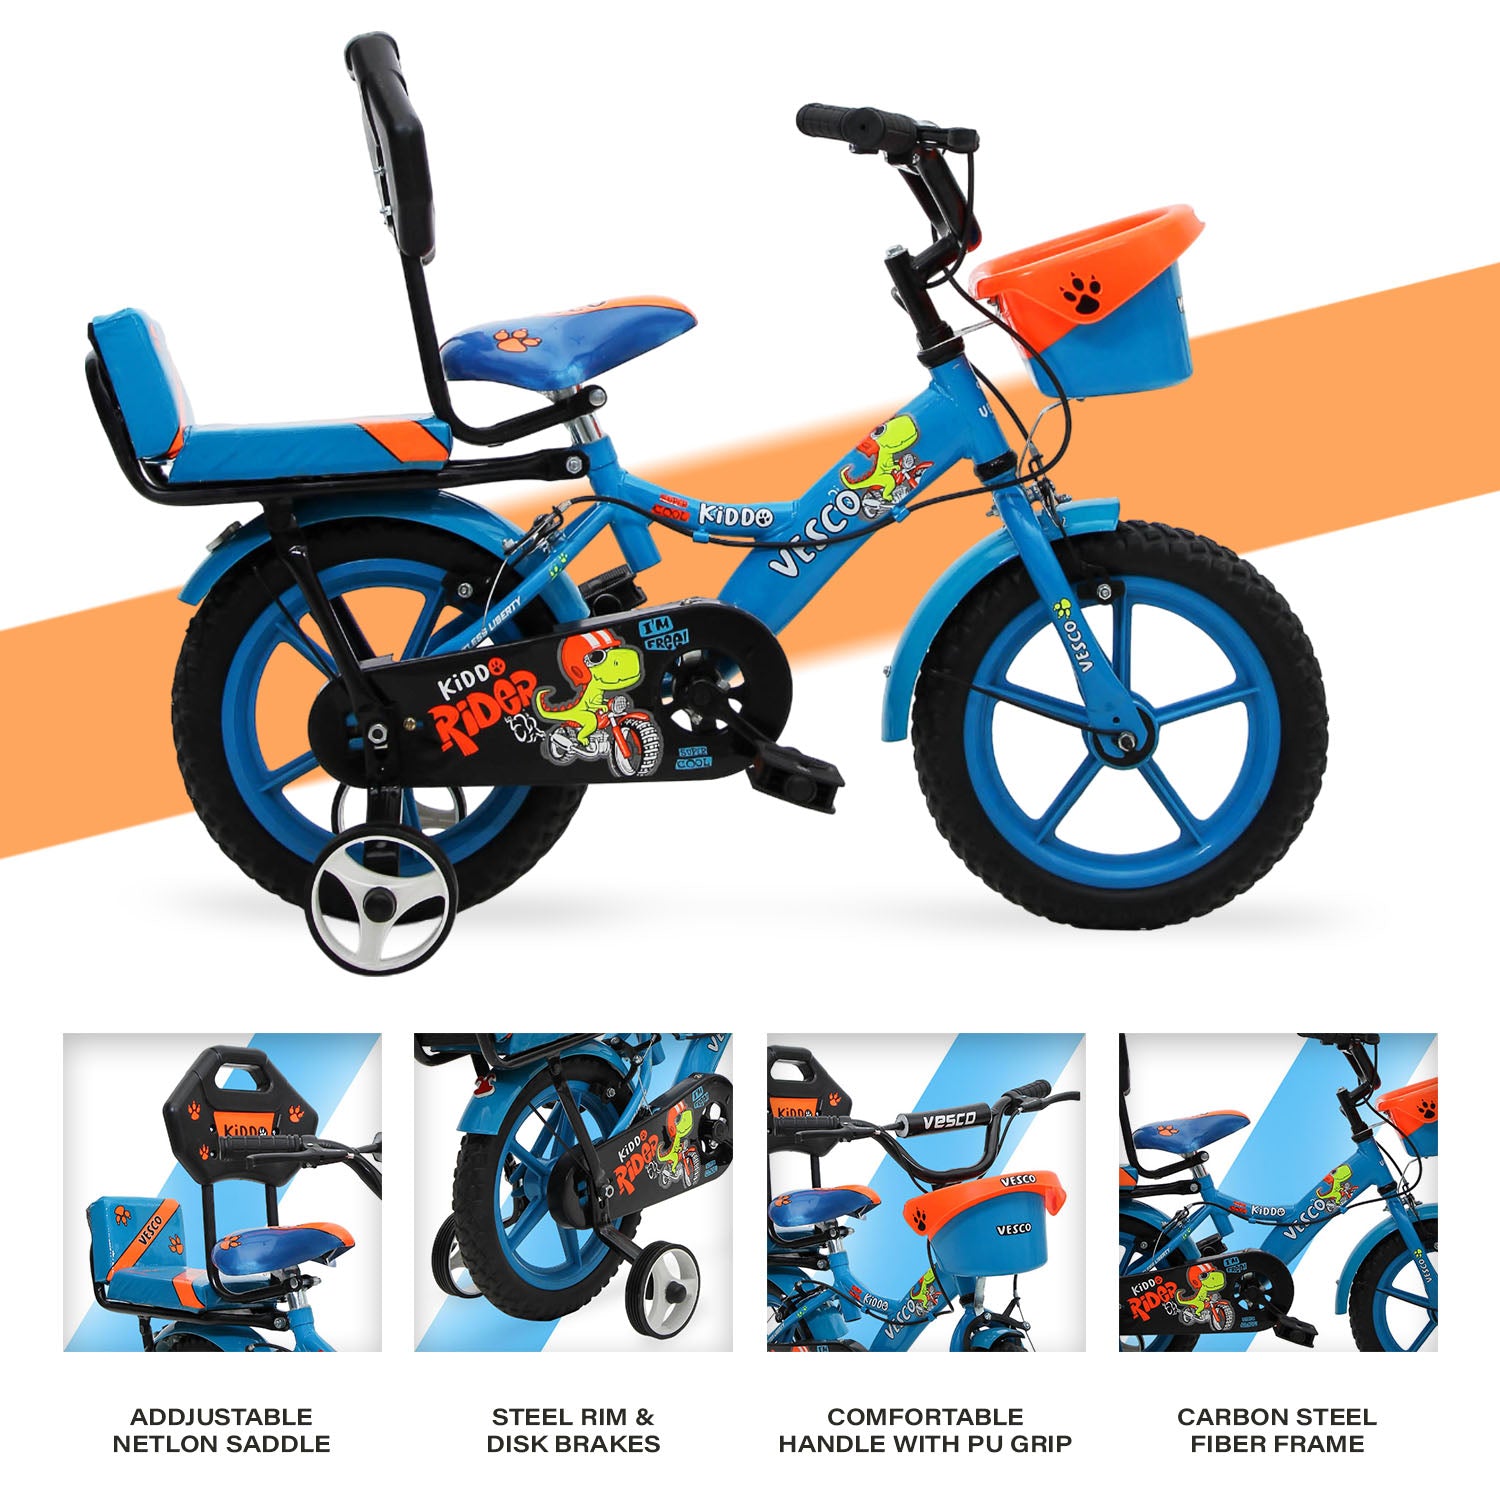 VESCO Kiddo Cycle 14-T Kids Sports Bicycle Training Wheels - Blue - A+ Content